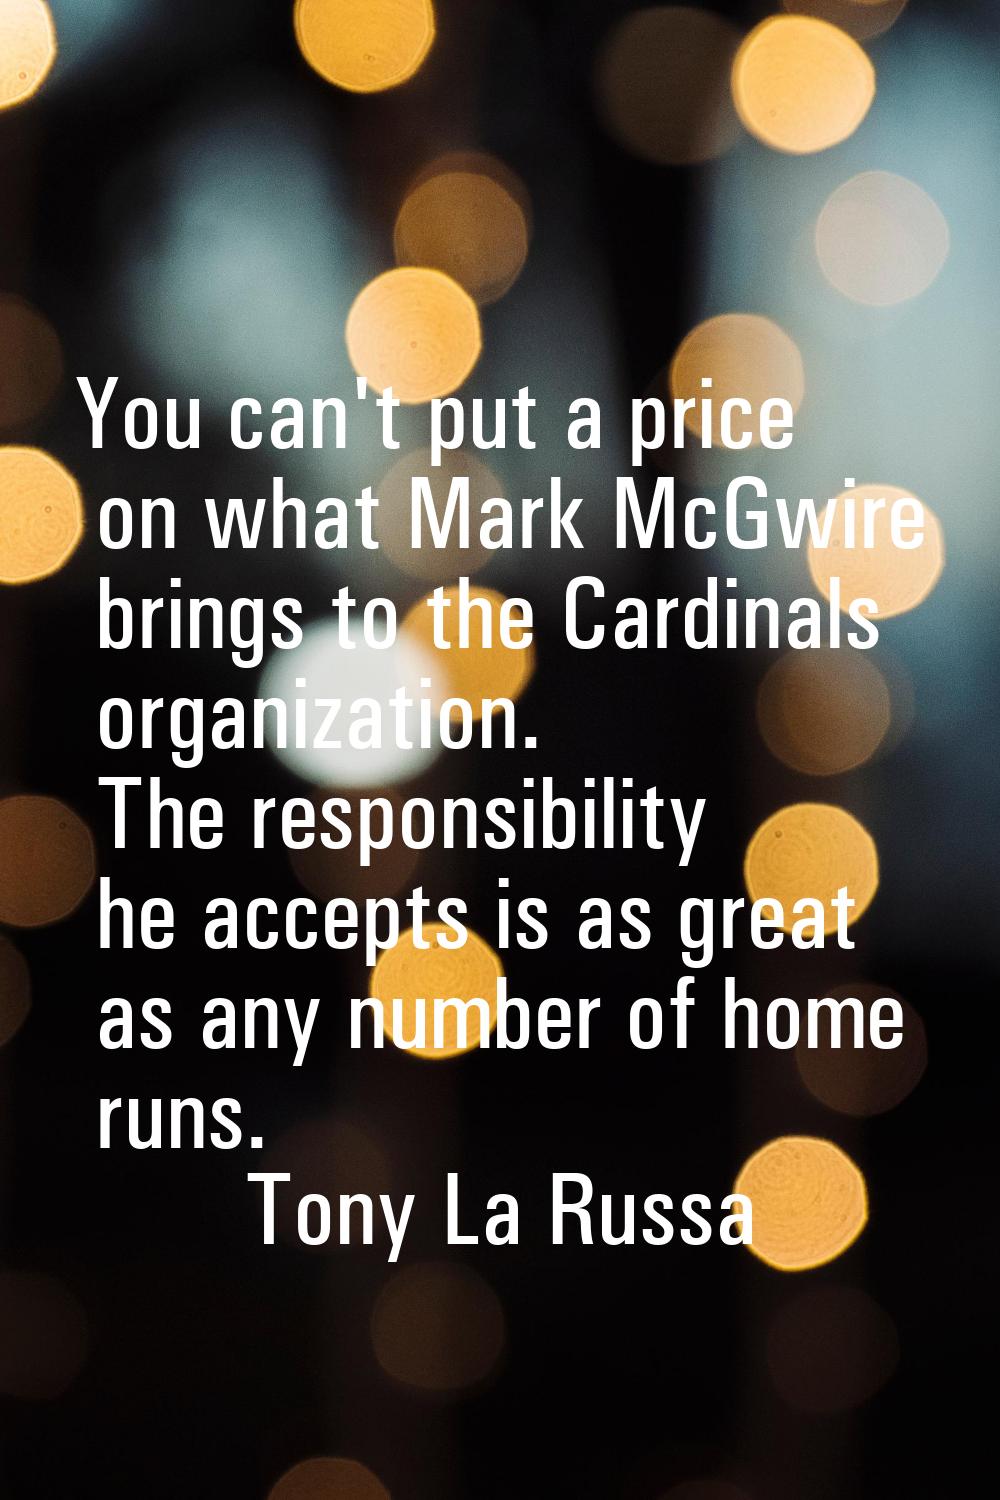 You can't put a price on what Mark McGwire brings to the Cardinals organization. The responsibility